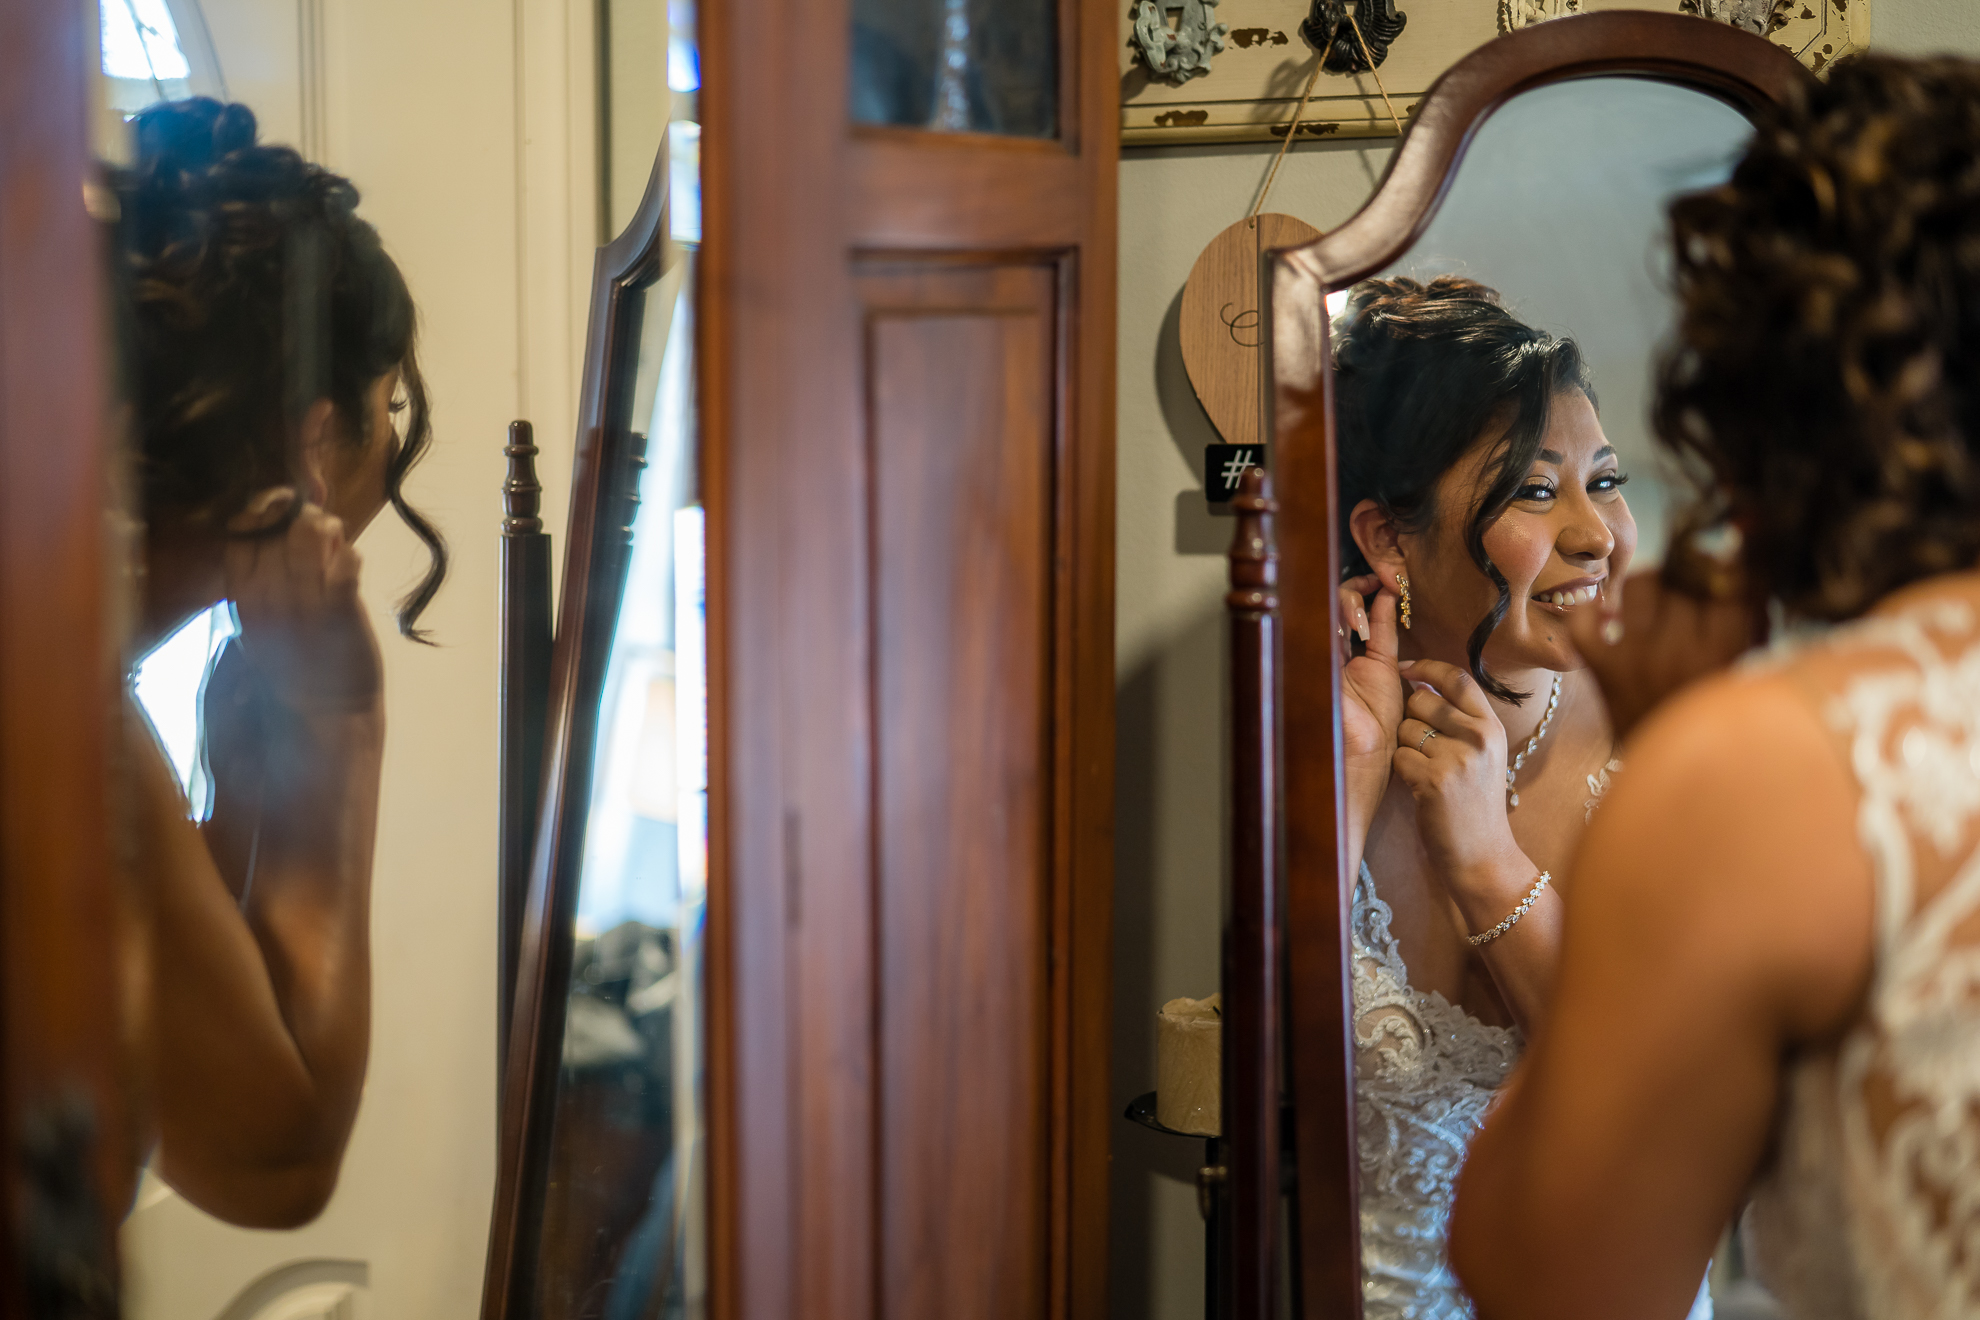 ThomasKim_photography A bride getting ready in front of a mirror for her special day.